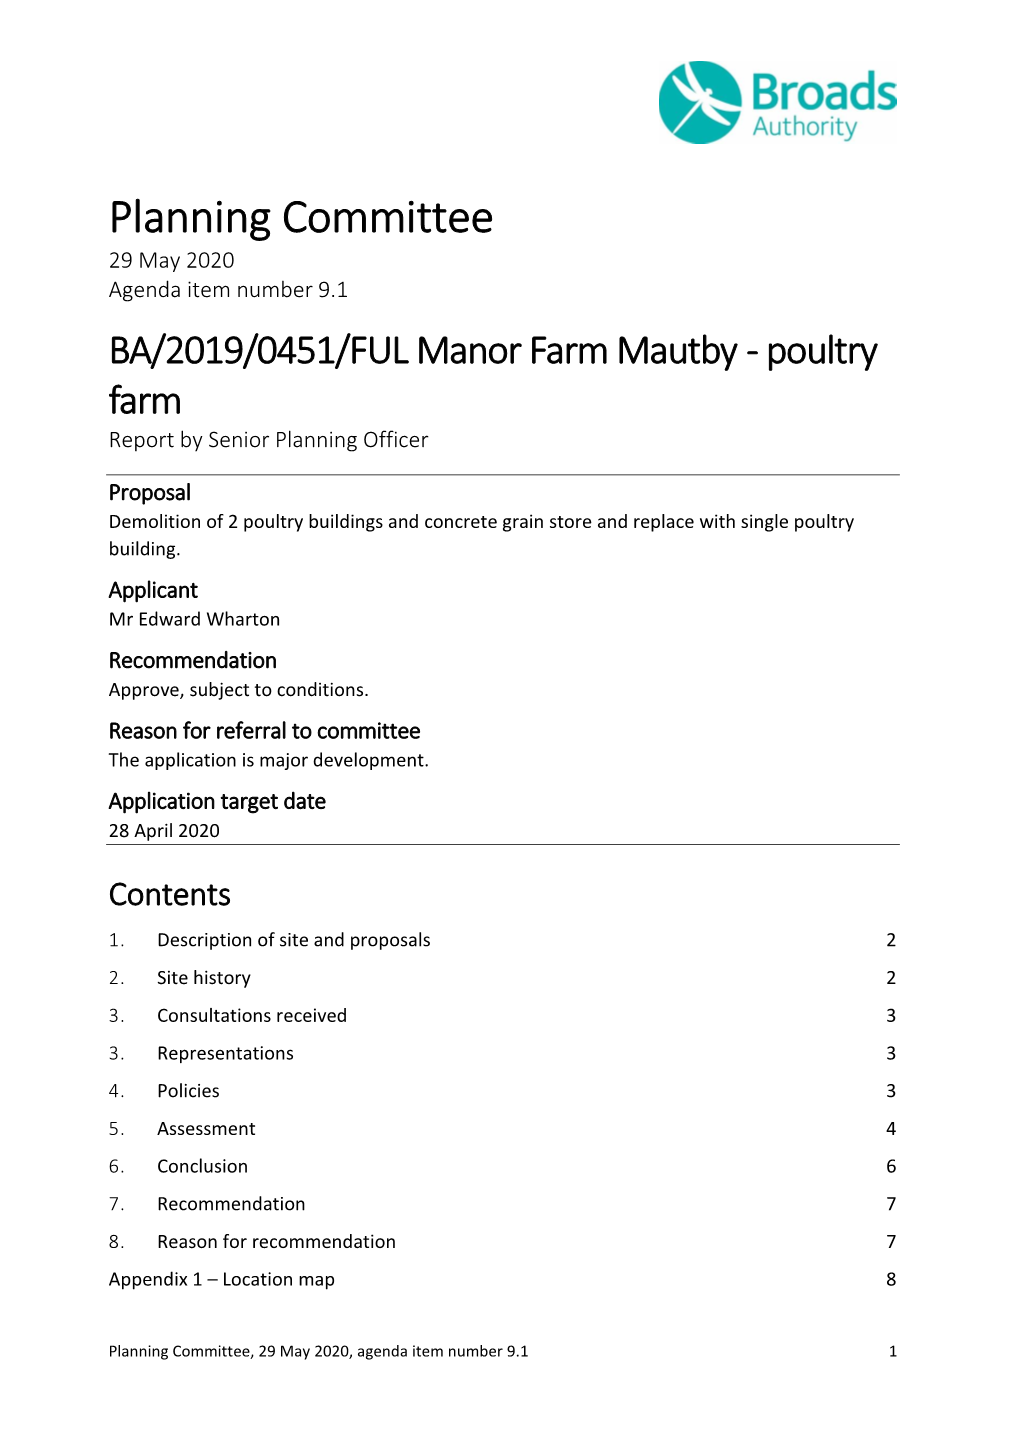 BA/2019/0451/FUL Manor Farm Mautby - Poultry Farm Report by Senior Planning Officer